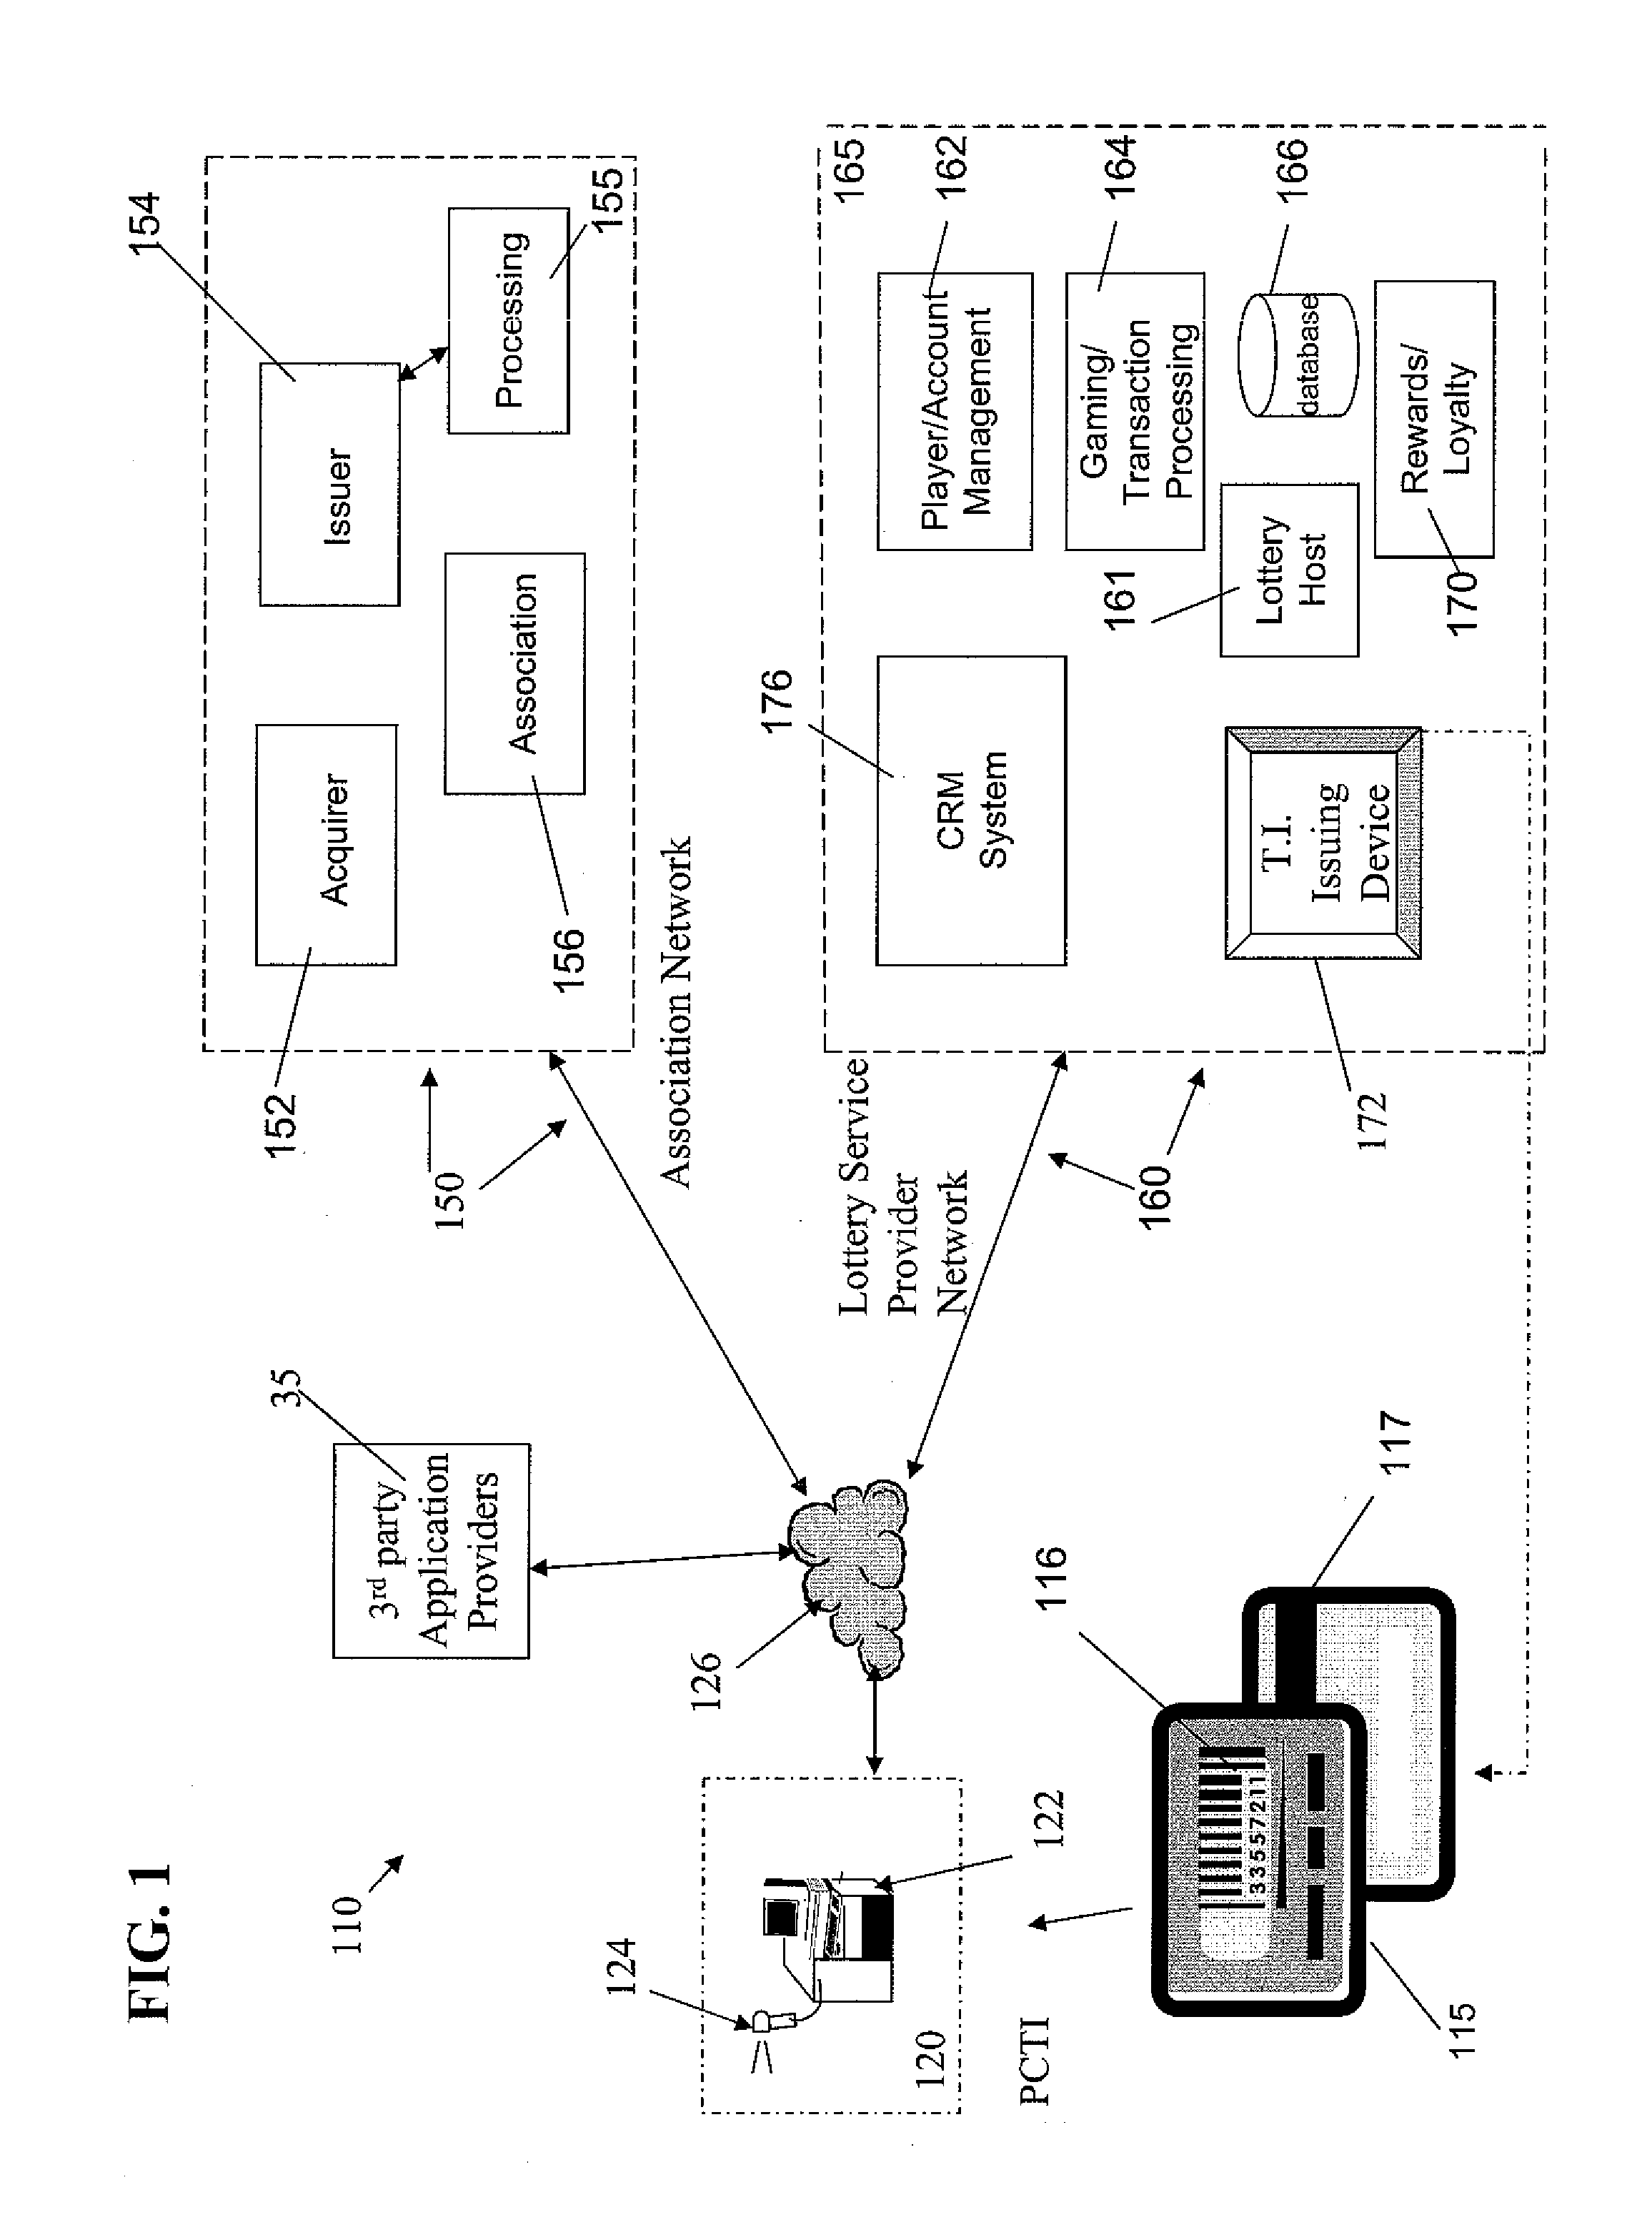 Lottery Transaction Device, System and Method with Paperless Wagering and Payment of Winnings